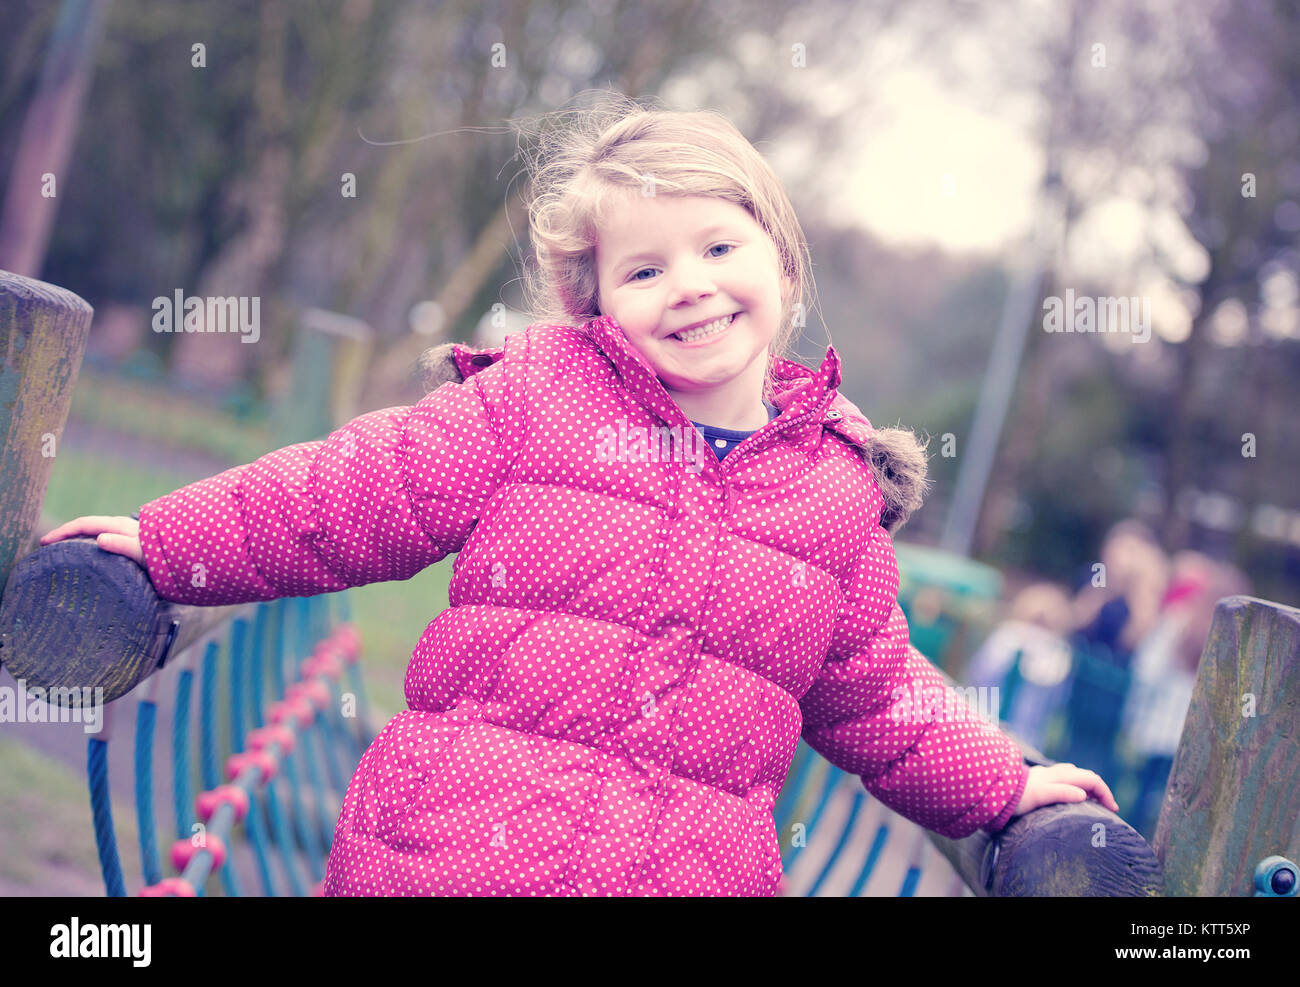 Girl on a climbing frame in a playground Stock Photo